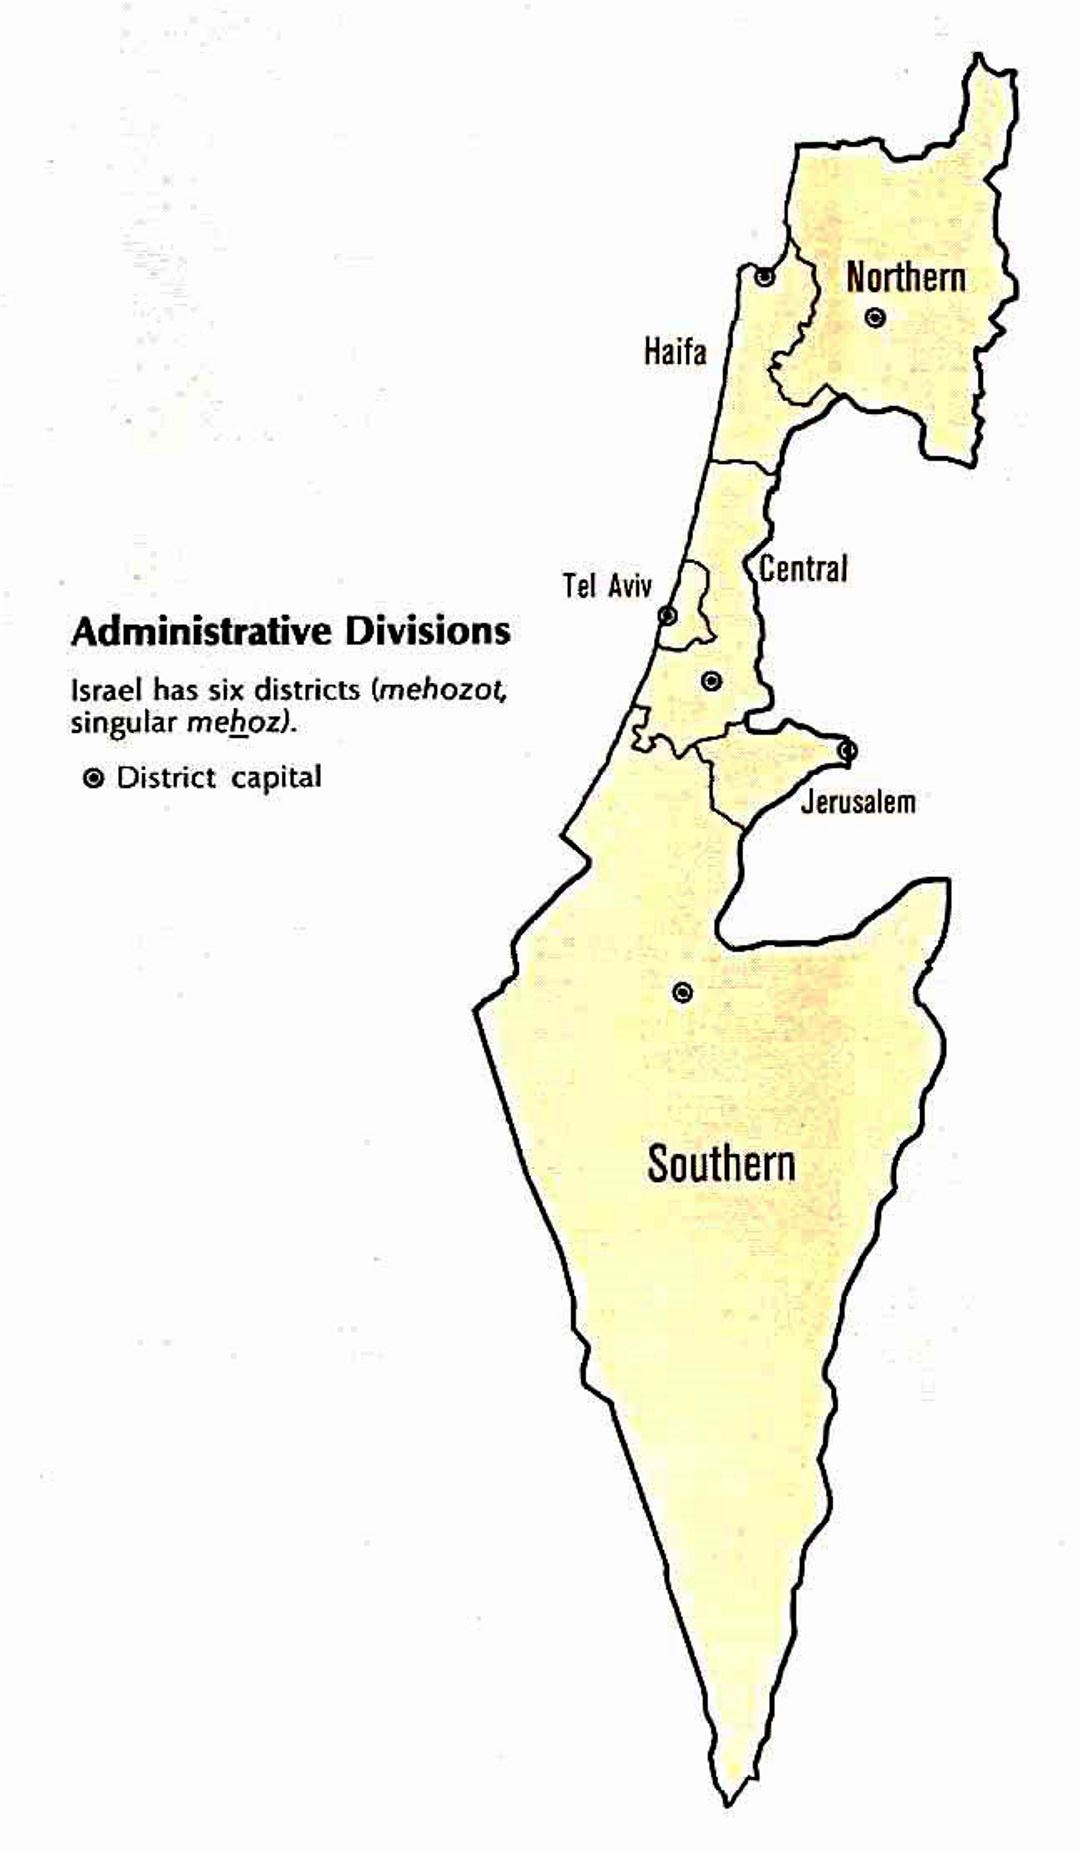 Administrative divisions map of Israel